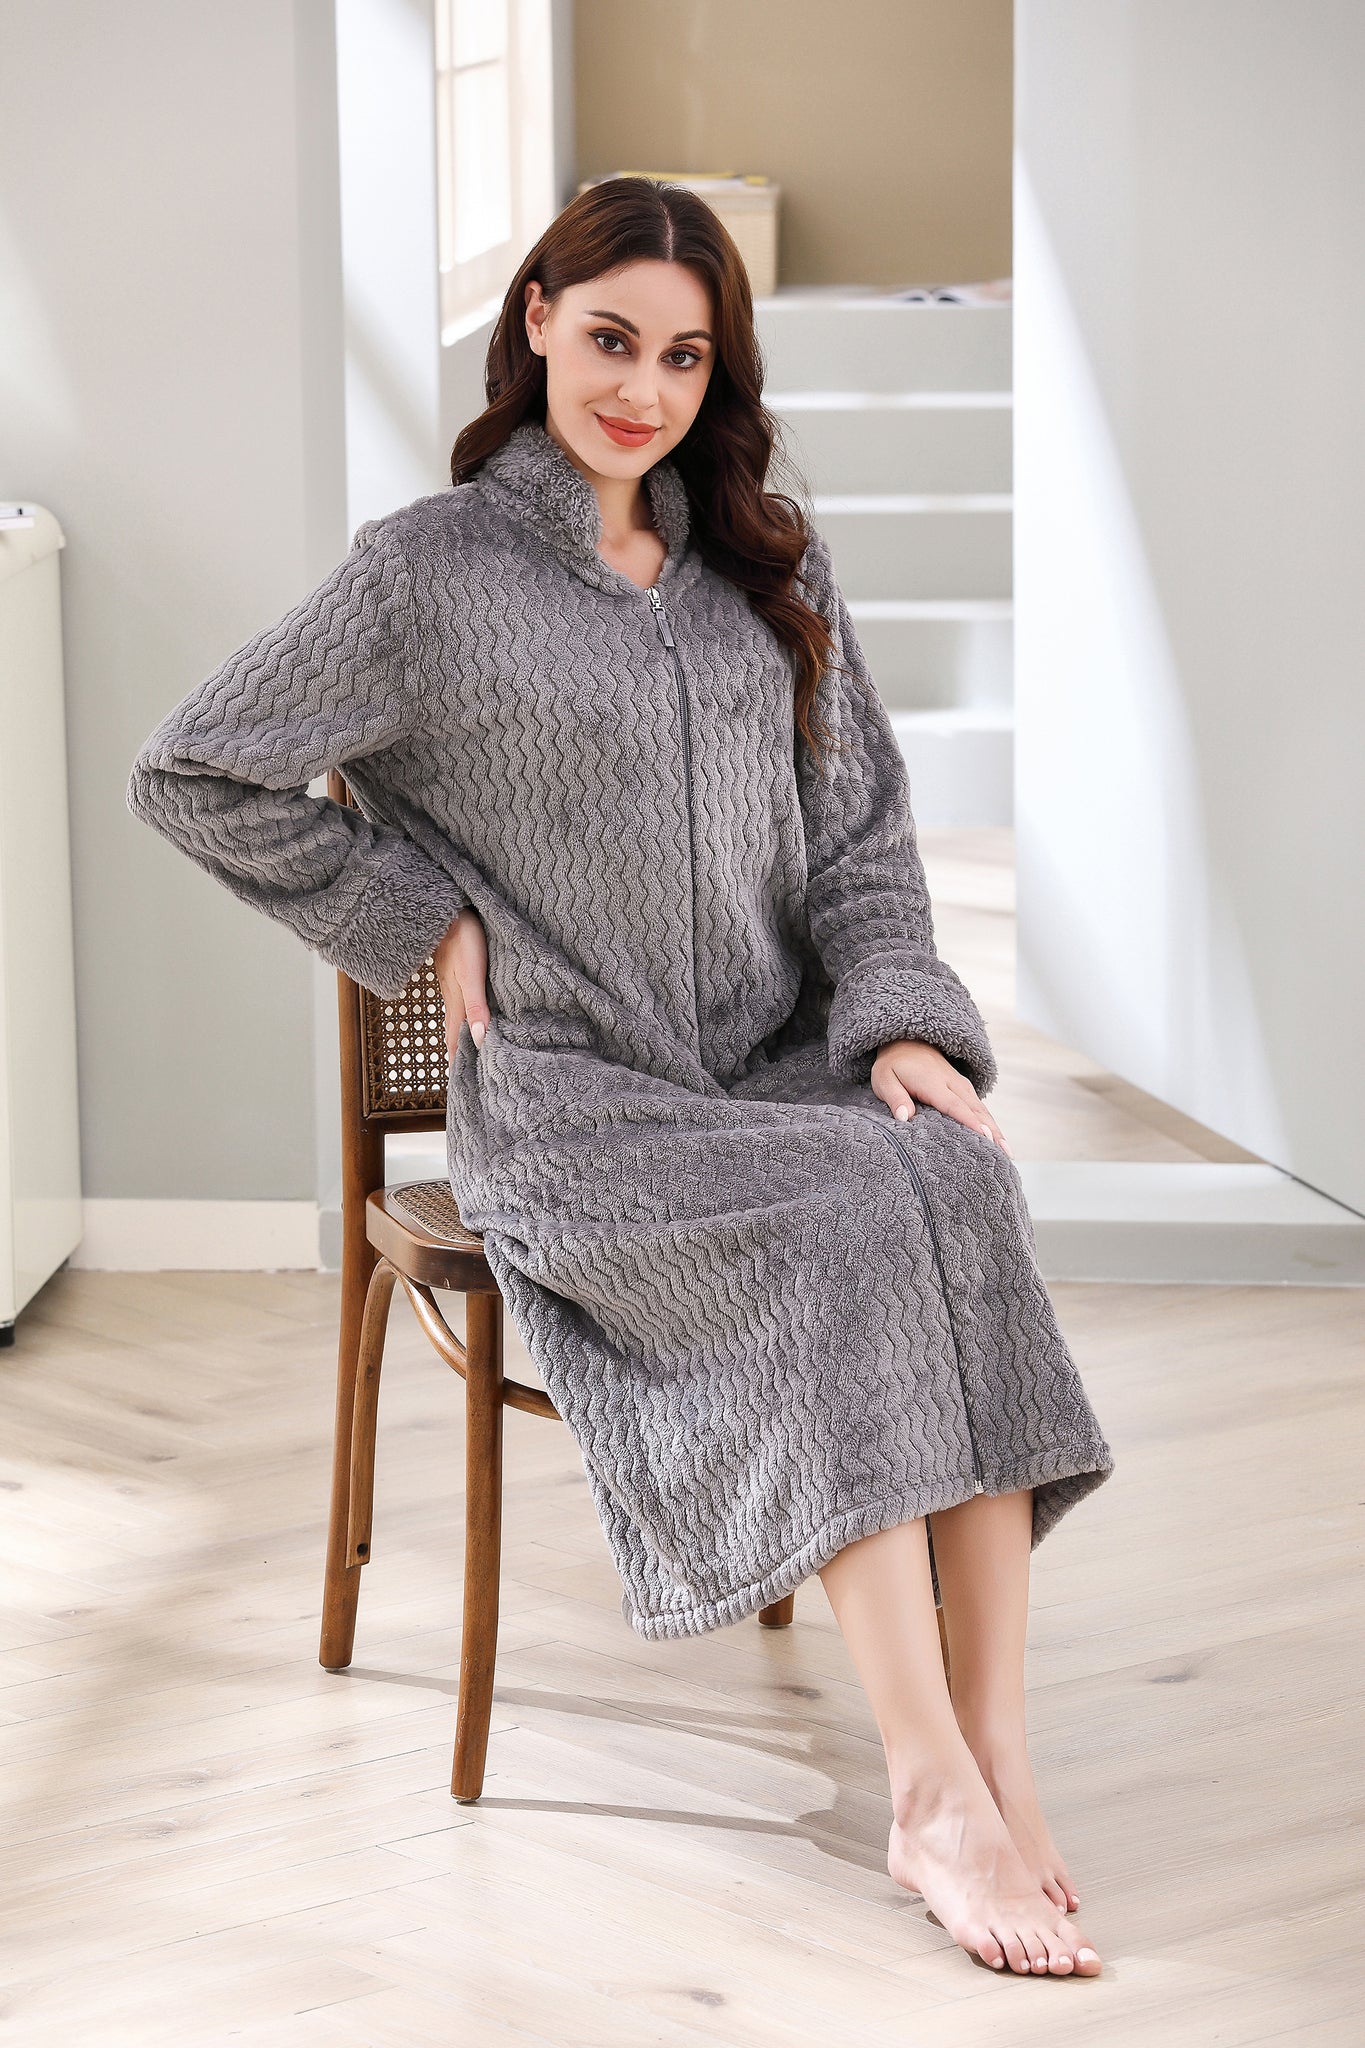 M&Co - Find us in our dressing gowns this evening 💤☕ Who else is secretly  loving the Autumn weather? Let's get cosy 👉 https://bit.ly/3ZuuQUS  #mymandco | Facebook